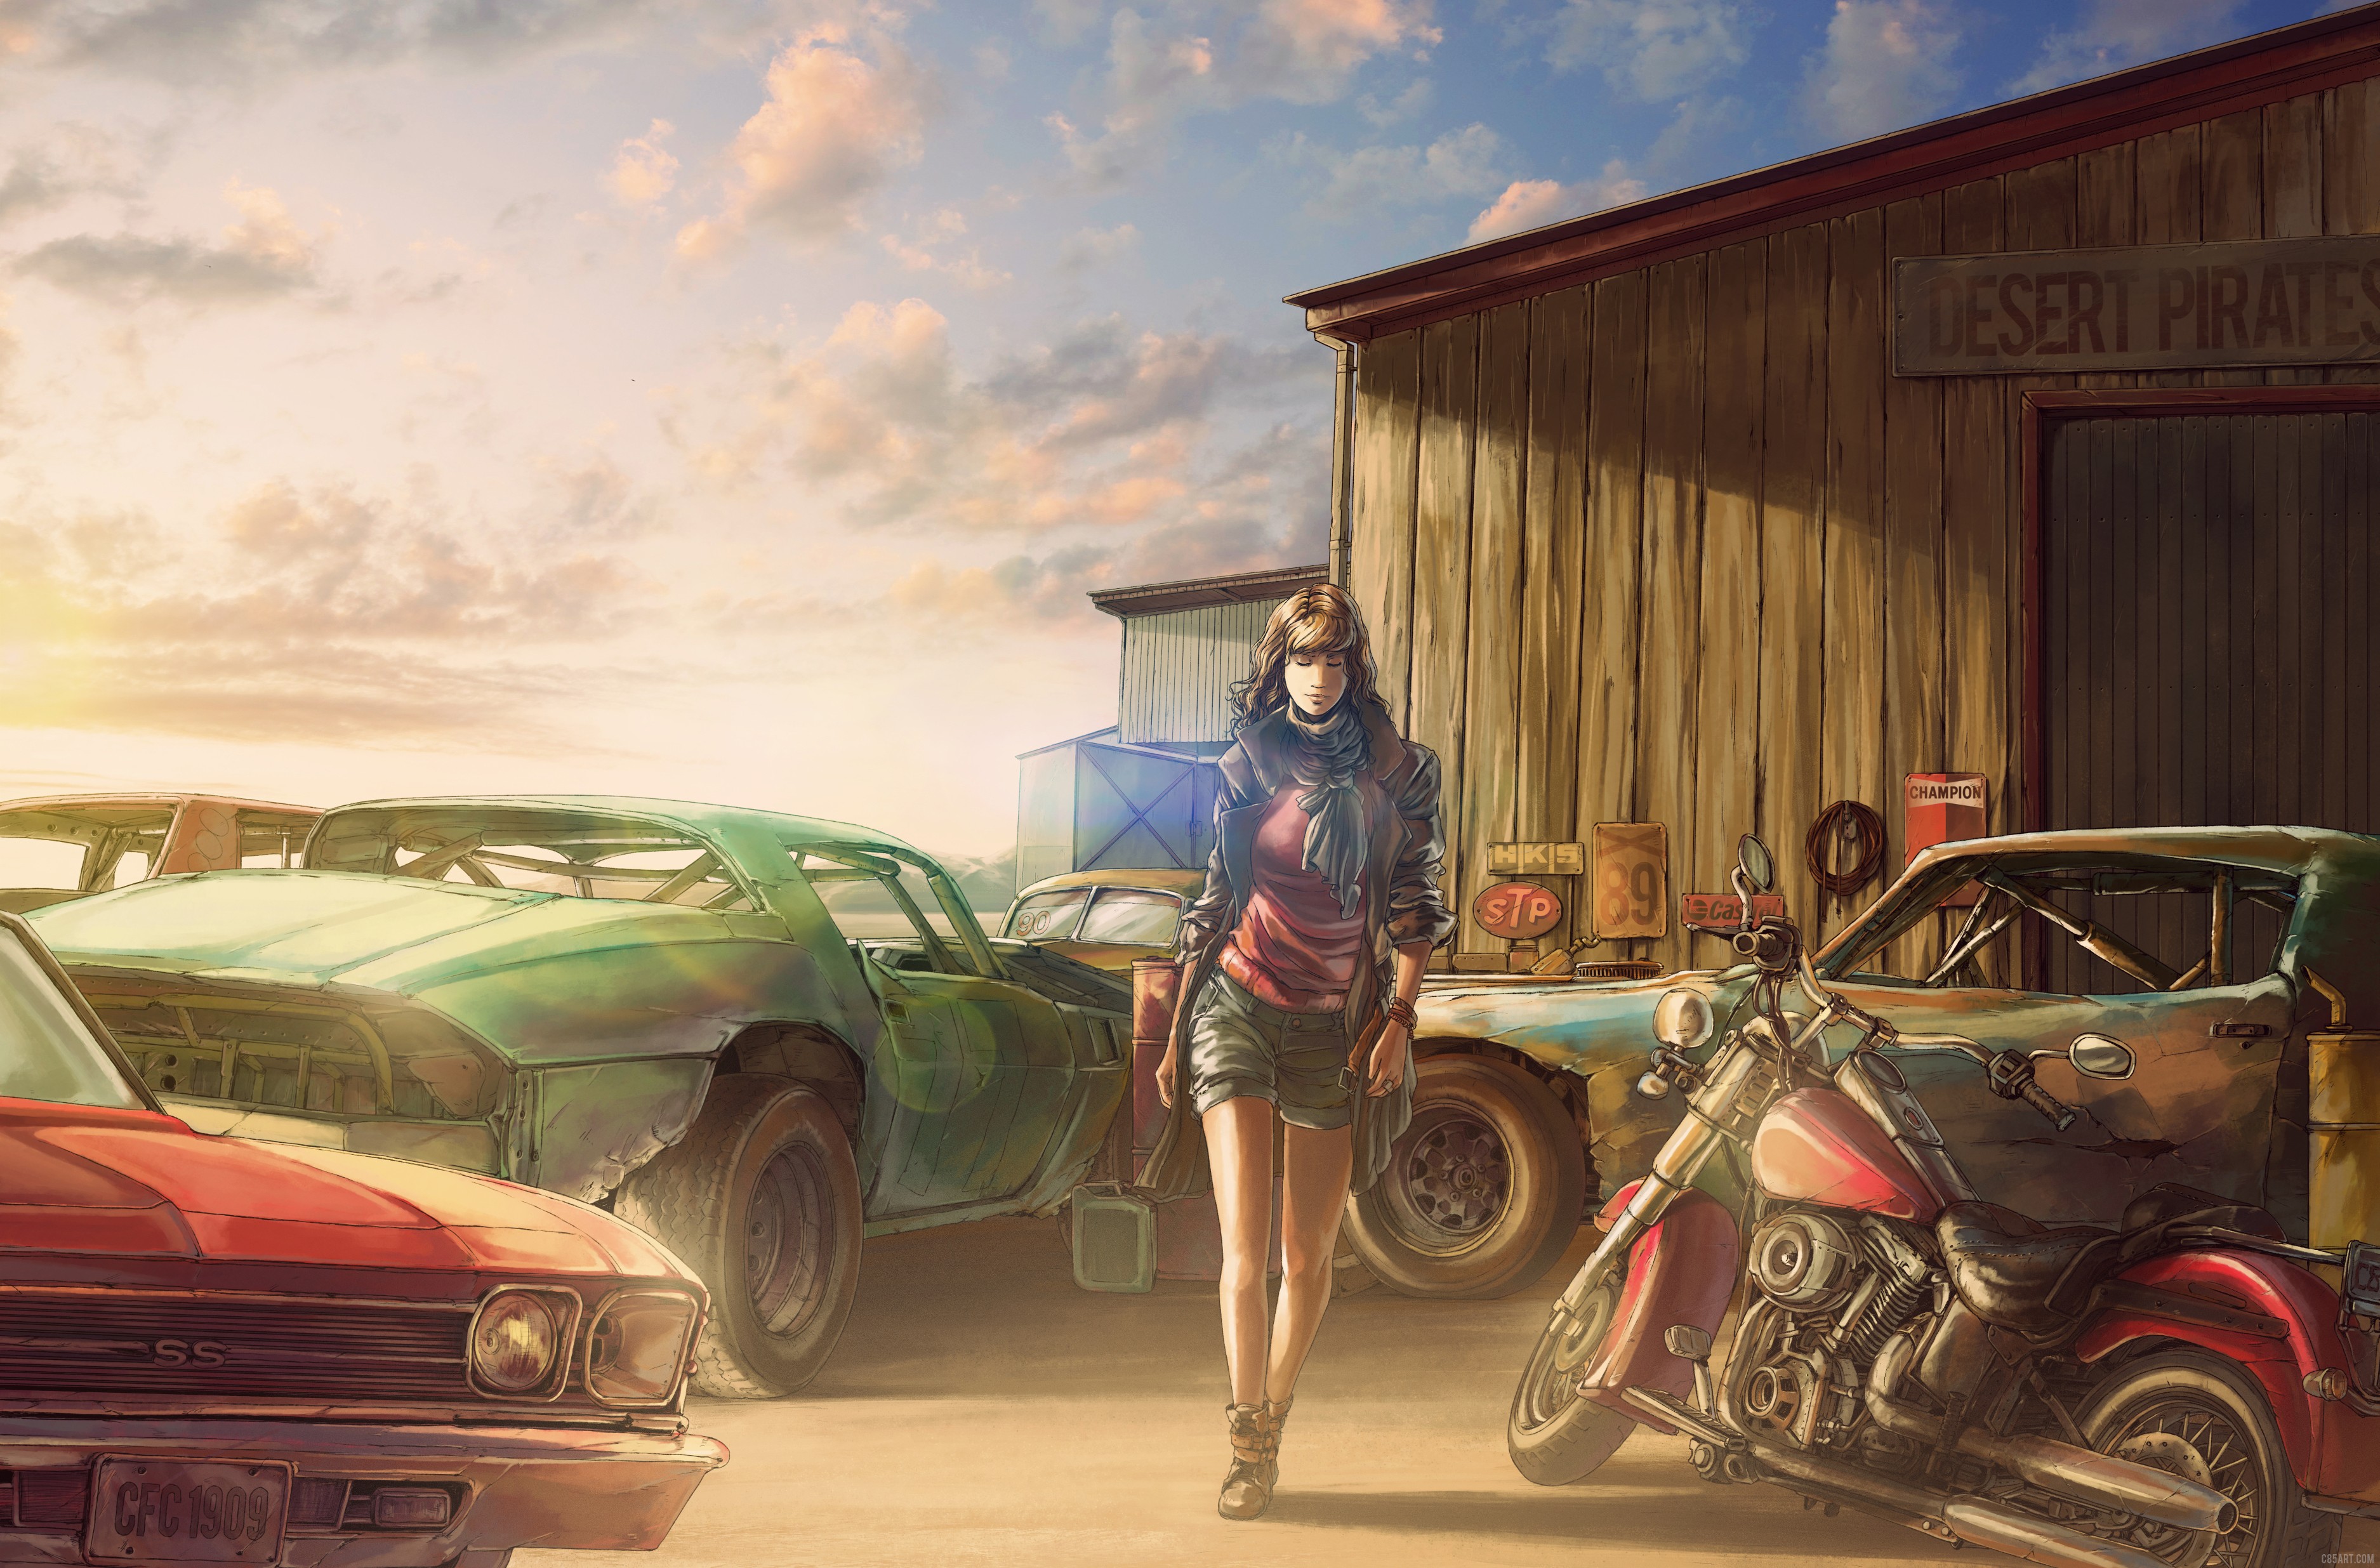 General 3750x2471 artwork women car women with cars women with motorcycles motorcycle DeviantArt women outdoors outdoors standing red cars green cars